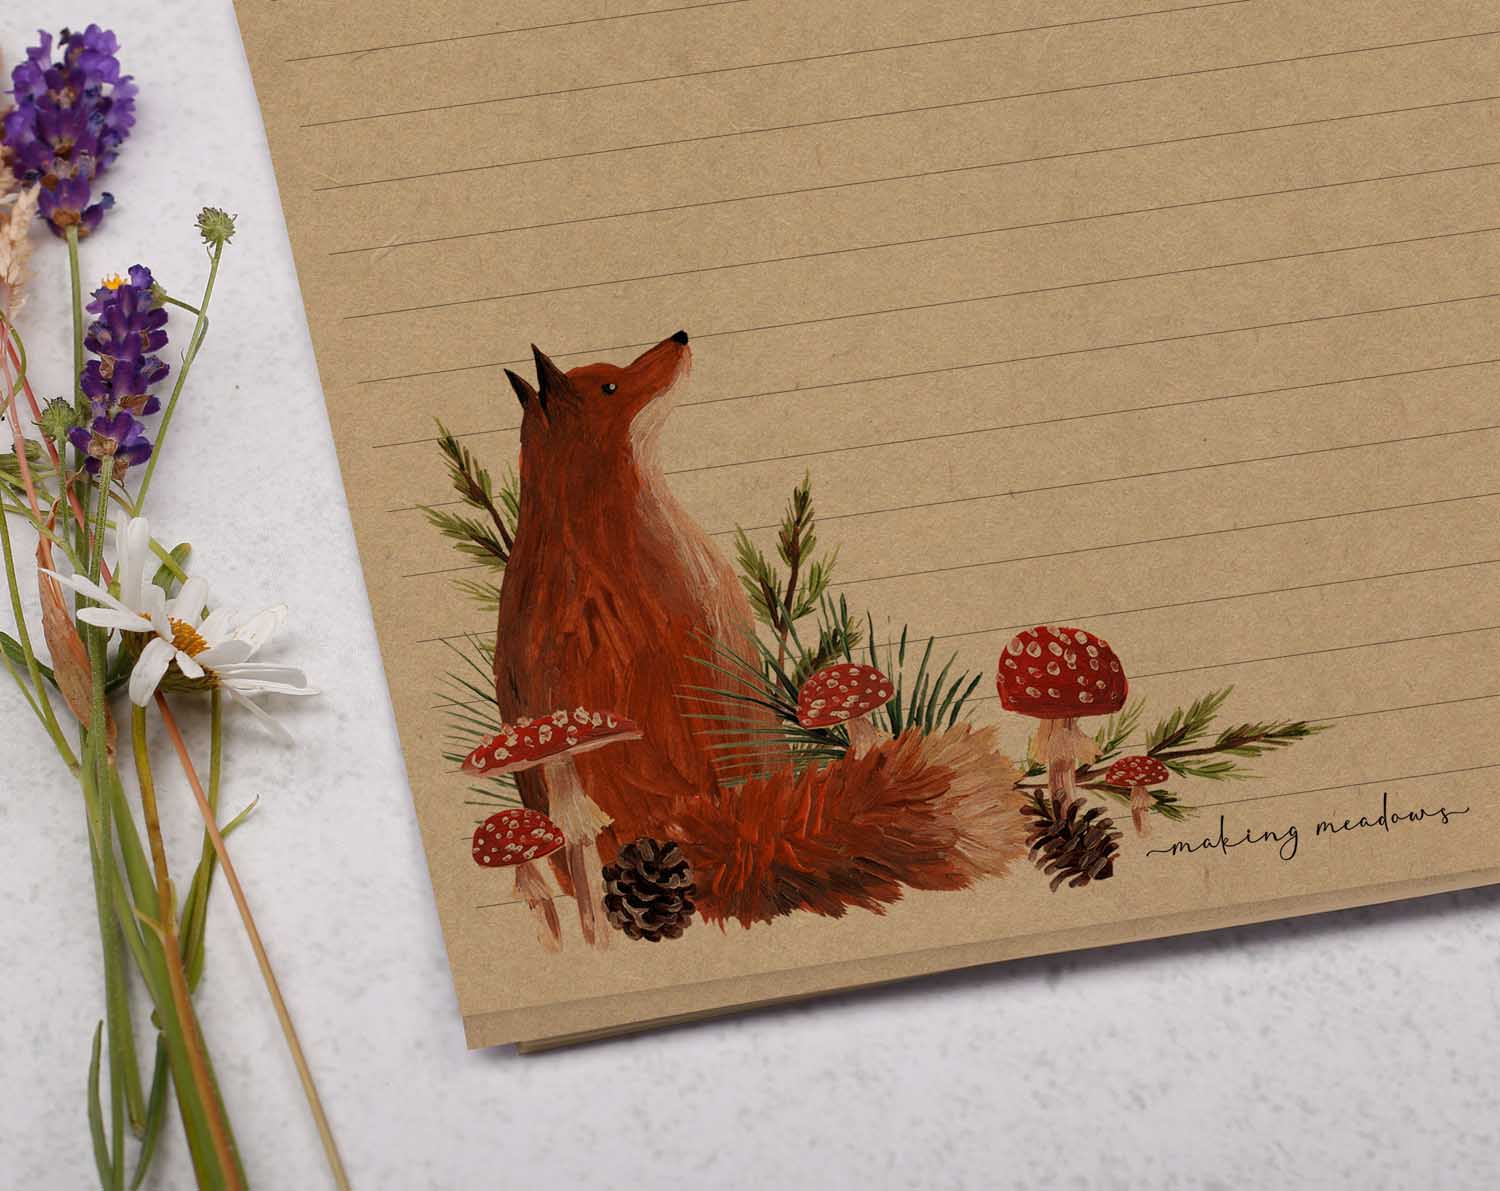 A4 Kraft letter writing paper sheets with a woodland fox design. This writing paper is filled with autumnal foliage and wild mushrooms, 